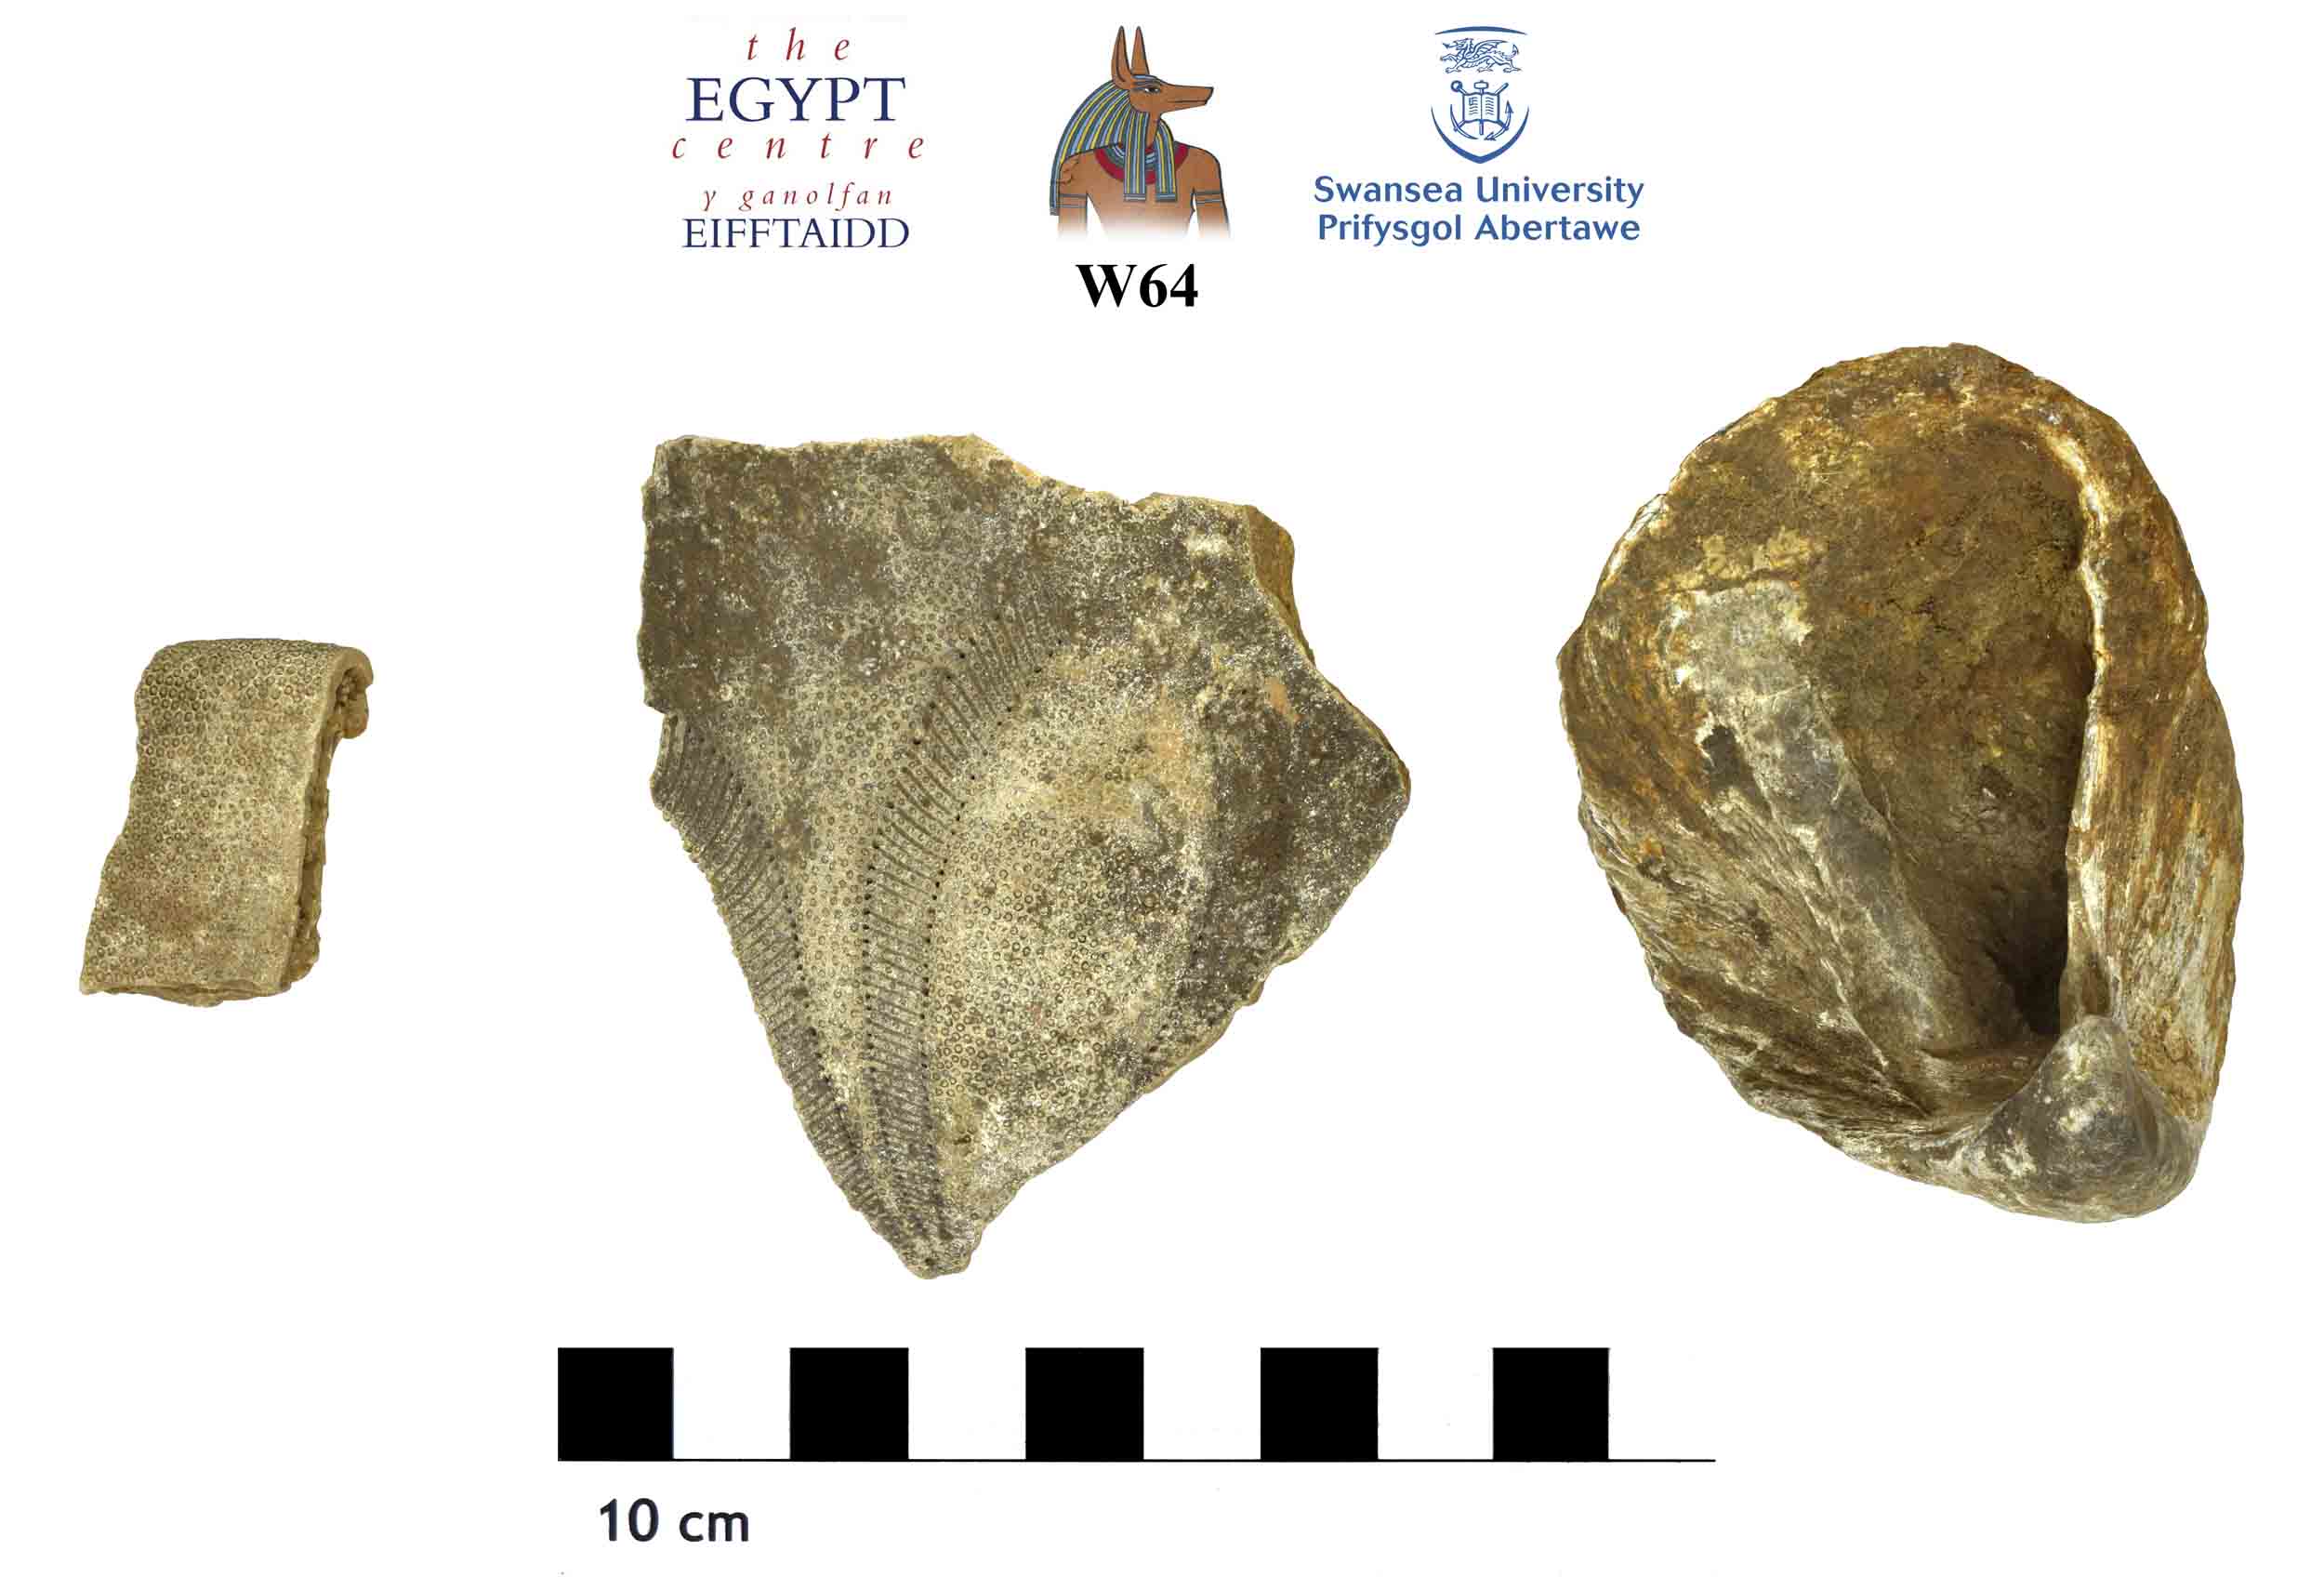 Image for: One shell and two fossils